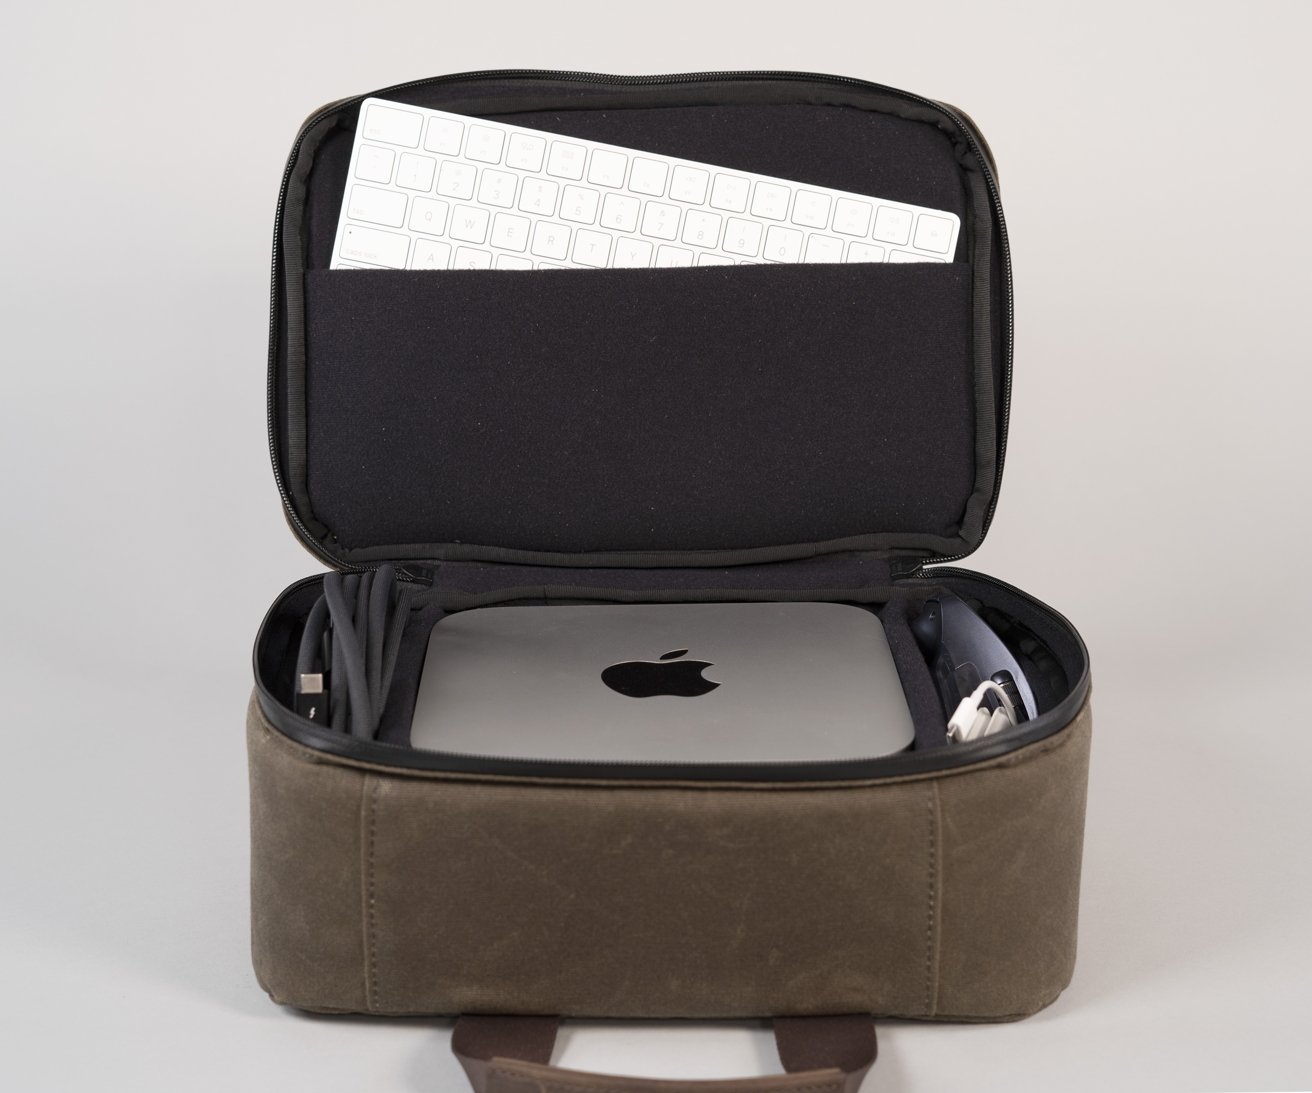 You can pack a lot in a WaterField Design Mac Studio travel bag